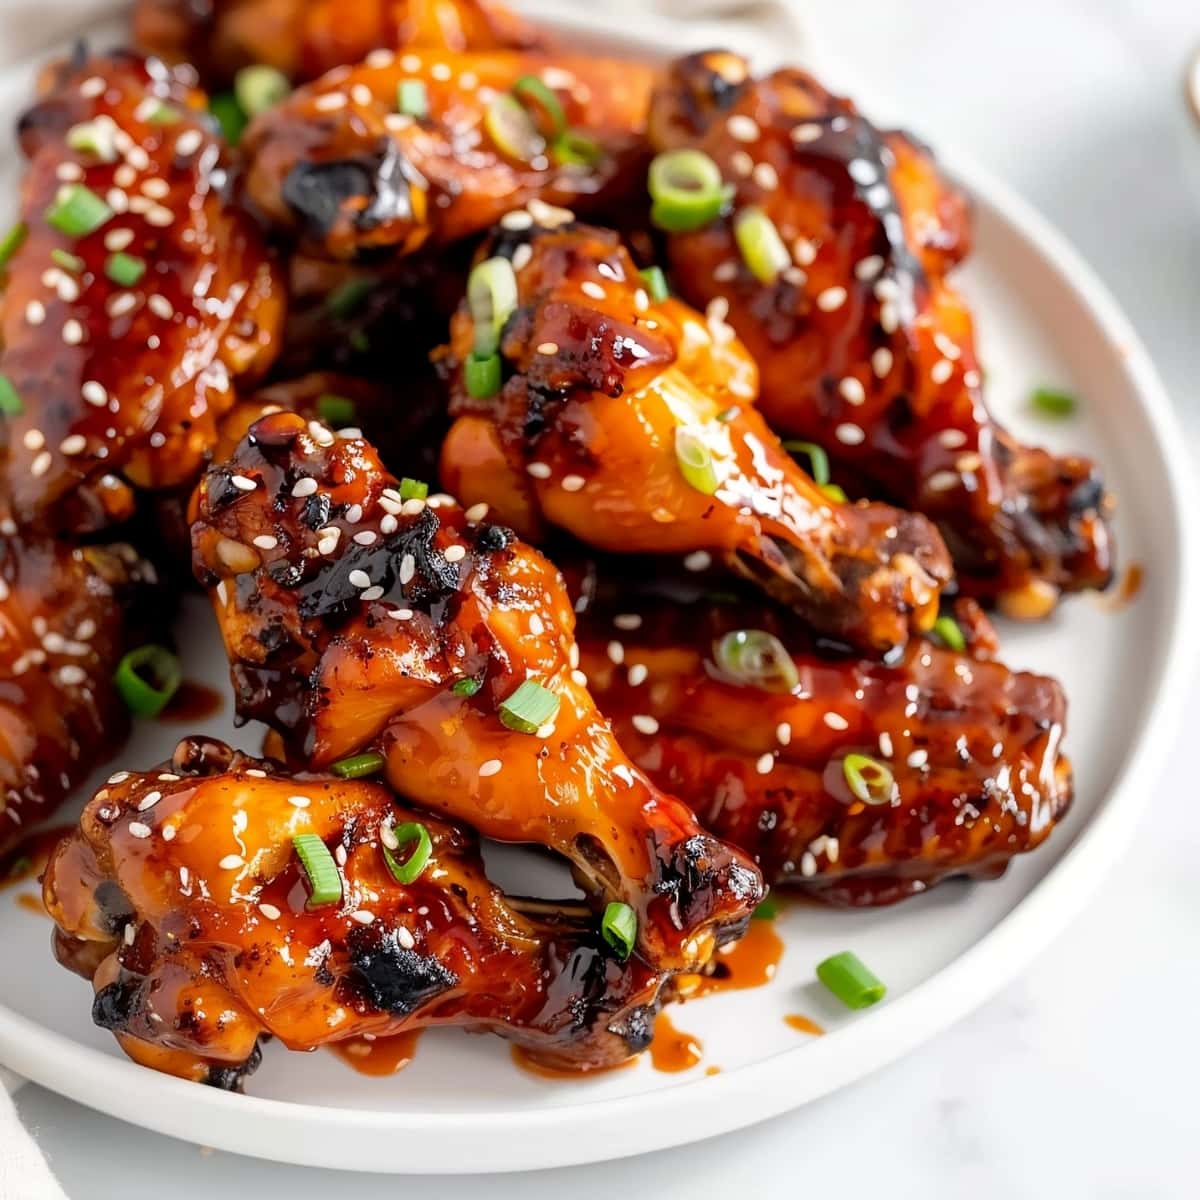 Homemade Korean chicken wings with sesame seeds and chopped green onions